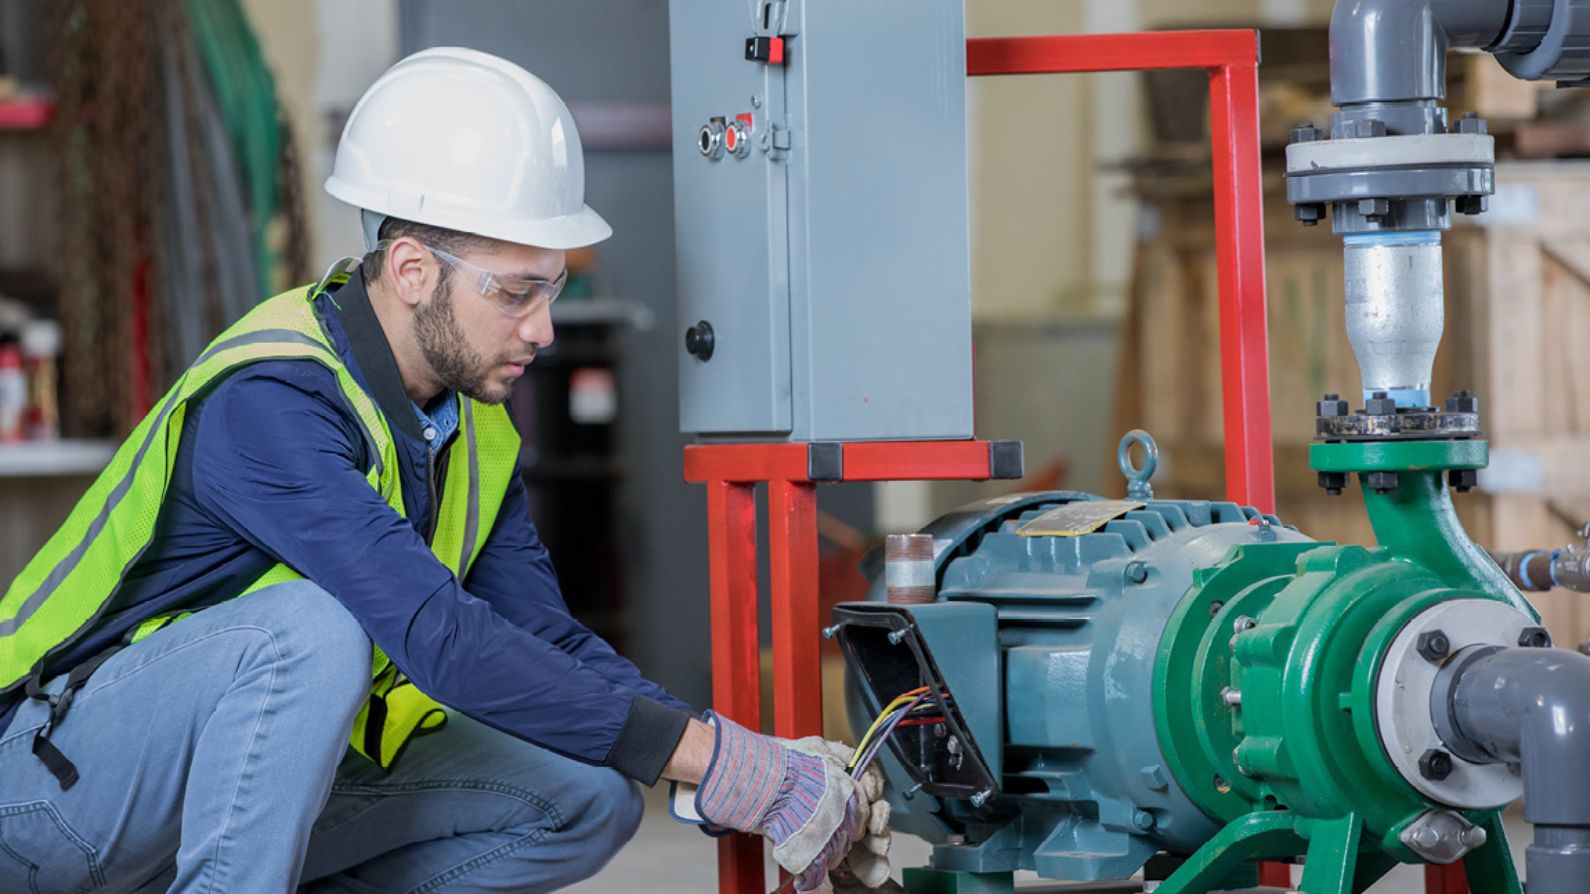 Engineer working on a motor at an oil and gas industry job site